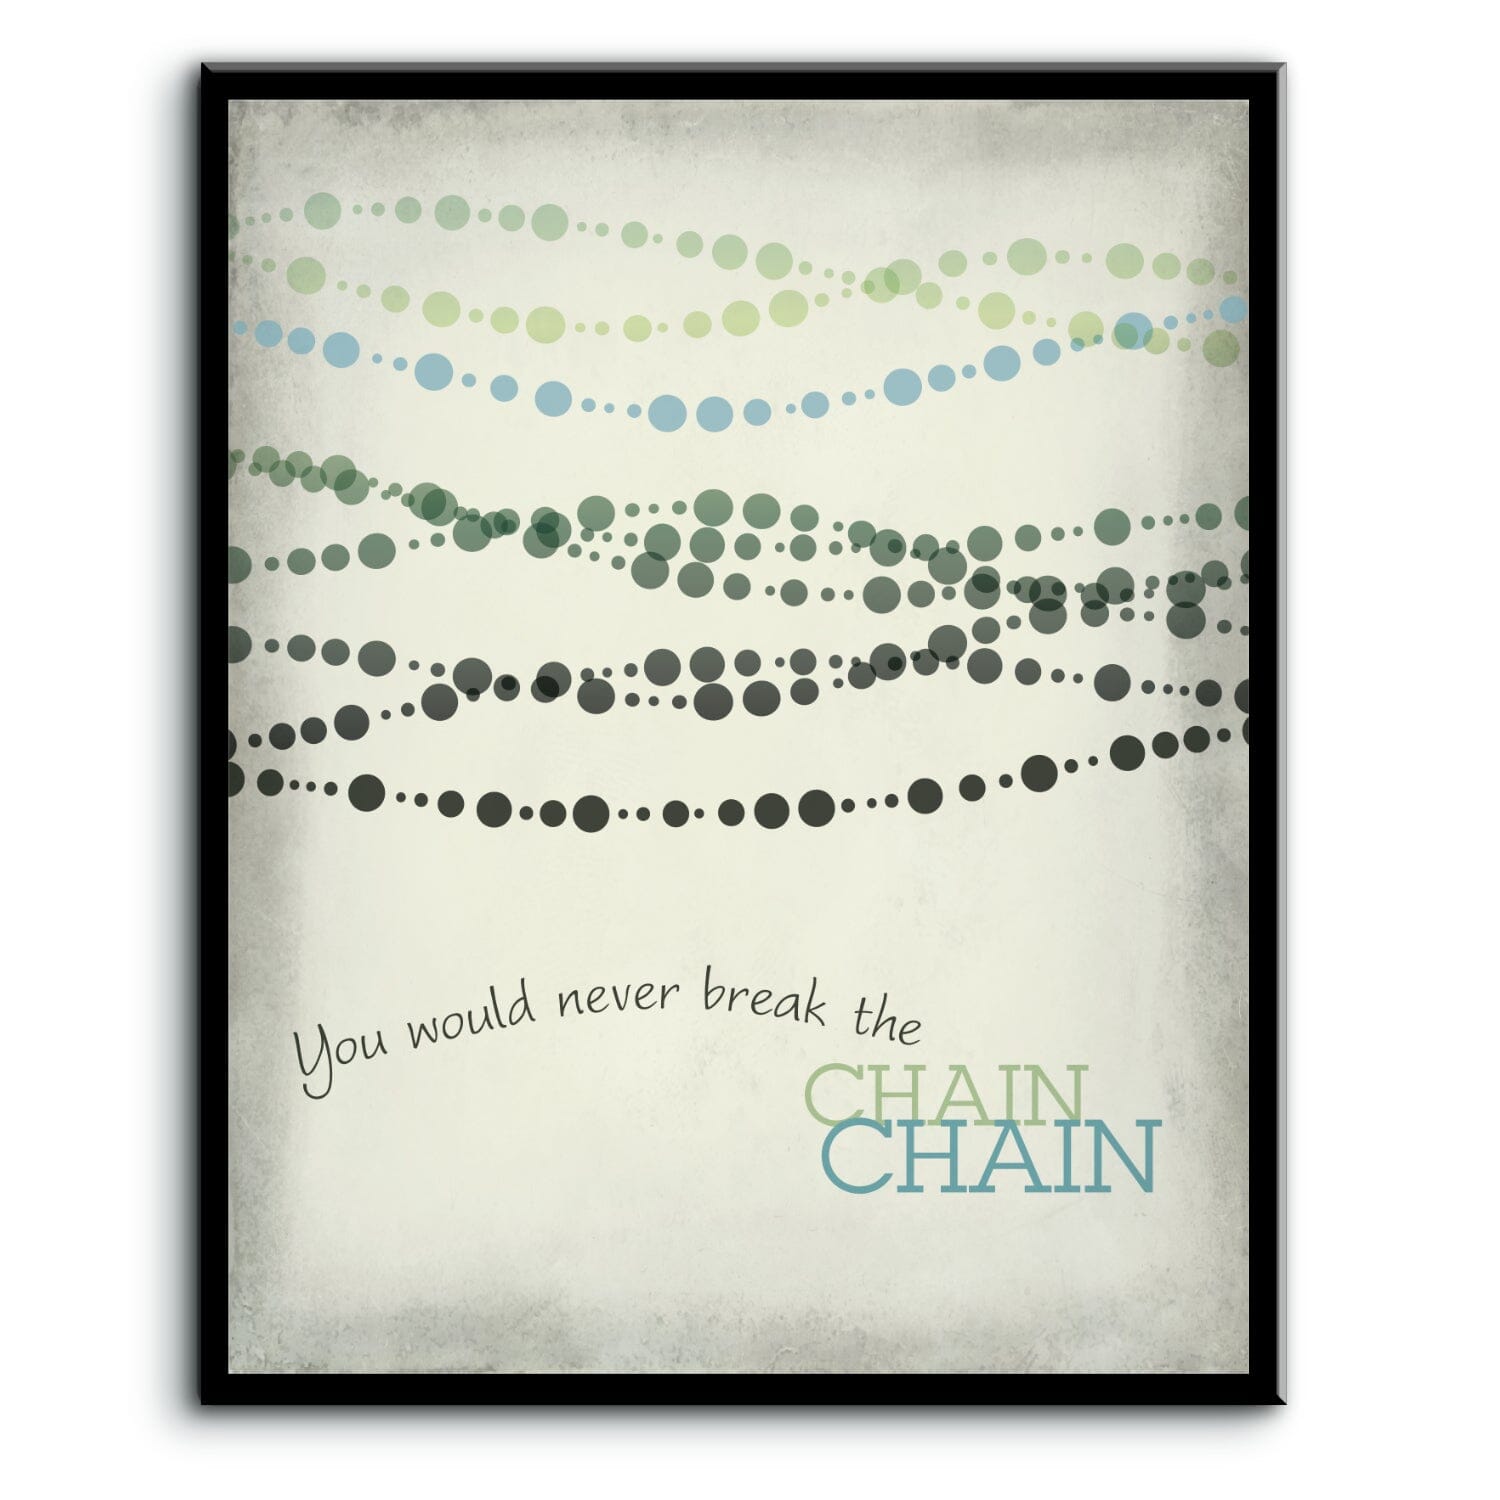 The Chain by Fleetwood Mac - Rock Music Song Lyric Print Song Lyrics Art Song Lyrics Art 8x10 Plaque Mount 